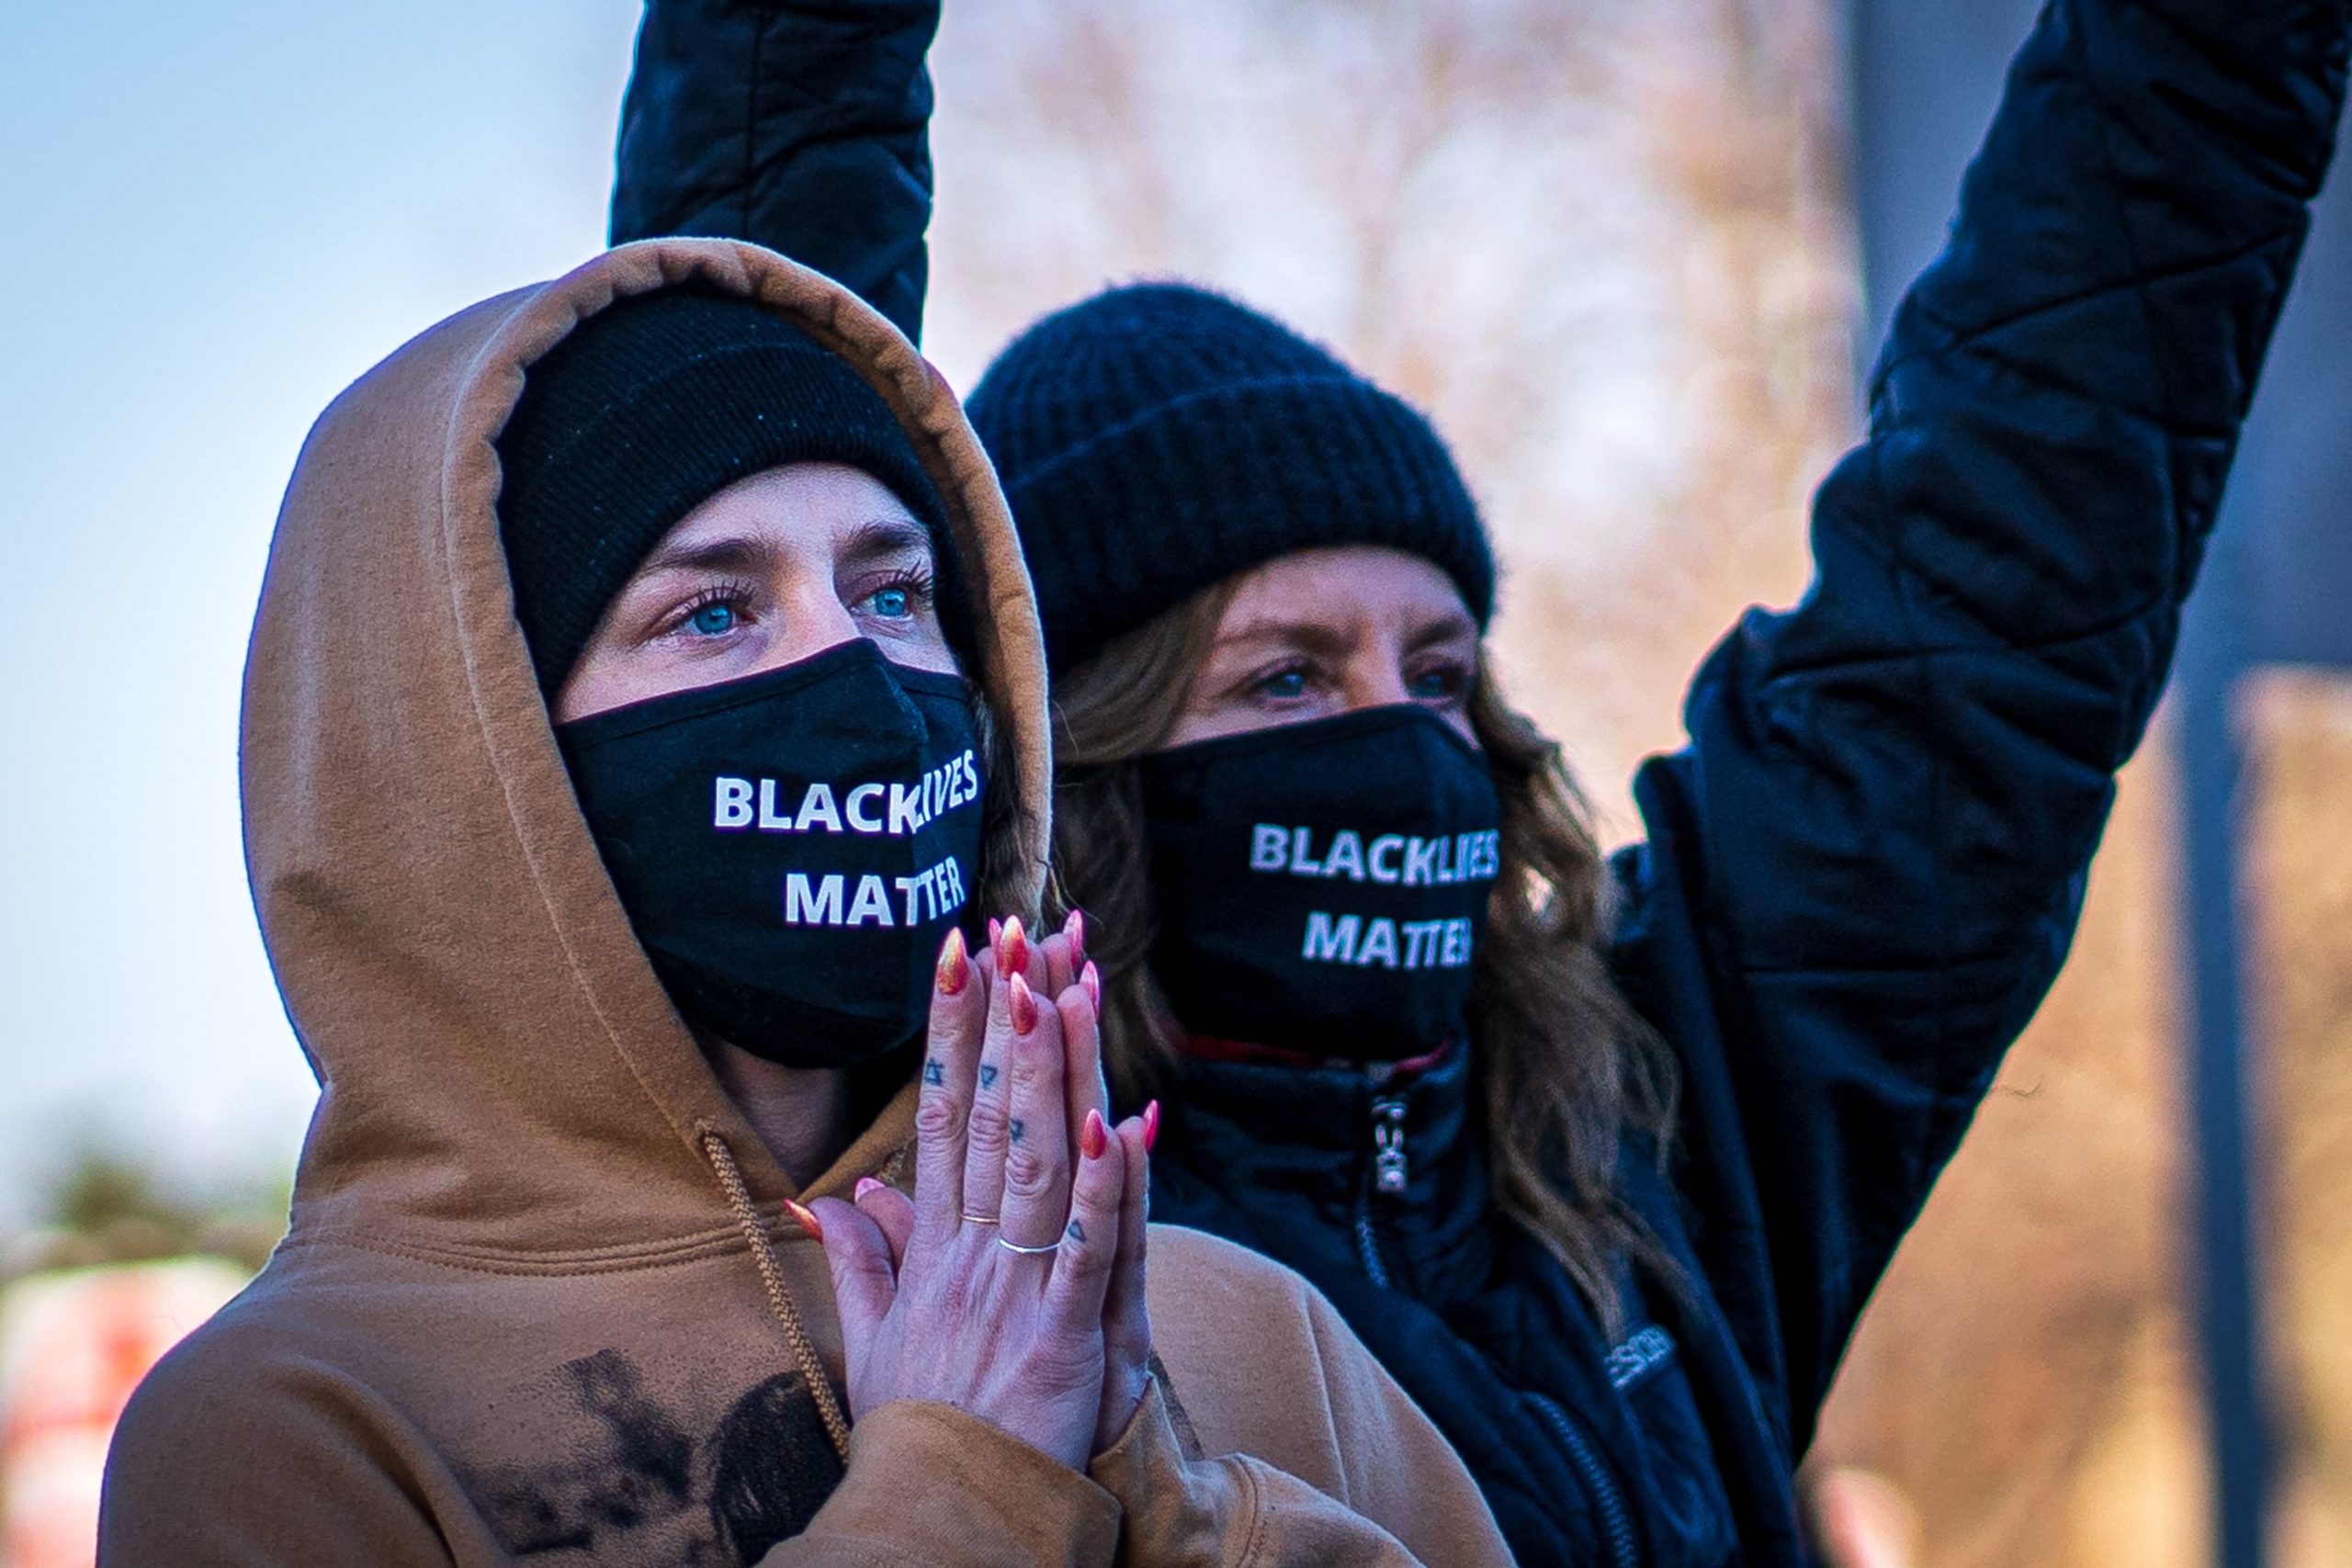 Two women wearing "Black Lives Matter" masks participate in the "Justice for George Floyd" march to the Minnesota State Capitol on March 19, 2021 in Saint Paul, Minnesota. (Photo by KEREM YUCEL/AFP via Getty Images)